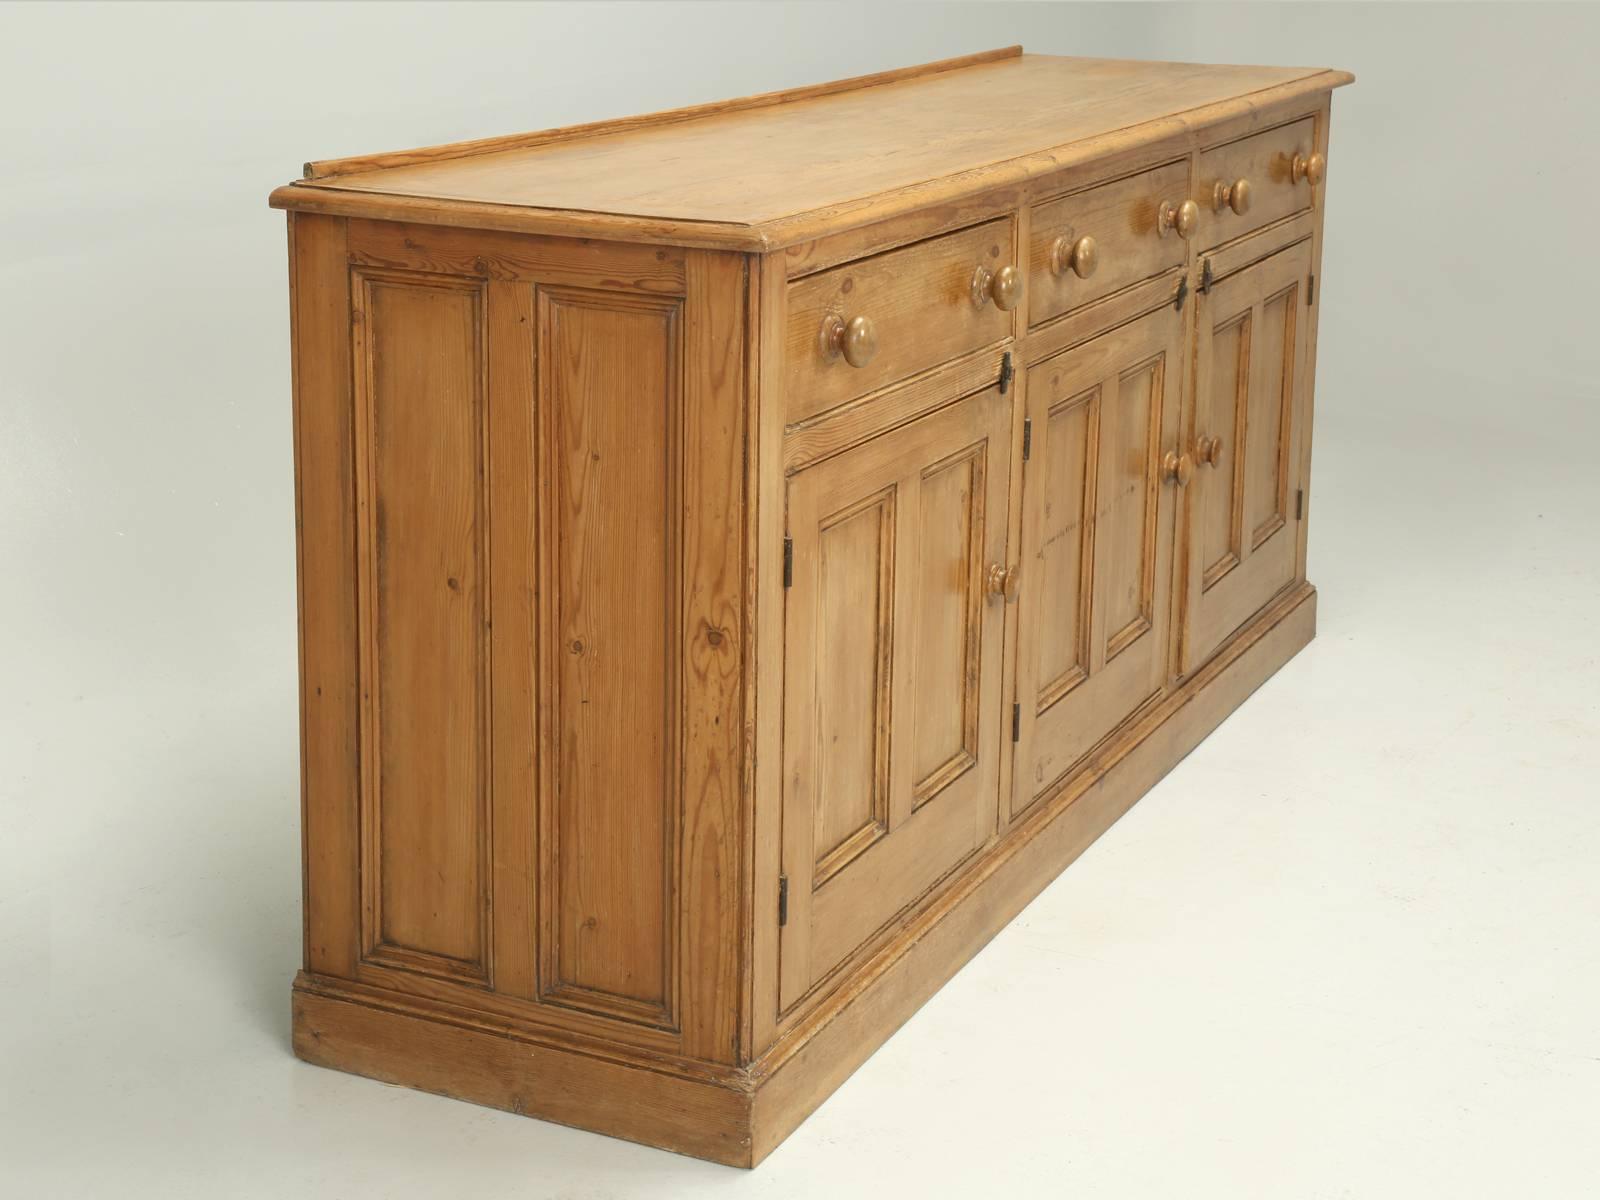 Country English antique pine buffet, or as the Brit’s would call it, a dresser or dresser base, since you did dress your food on it. This is a very original antique English pine buffet, that we actually came across in France, along with a matching